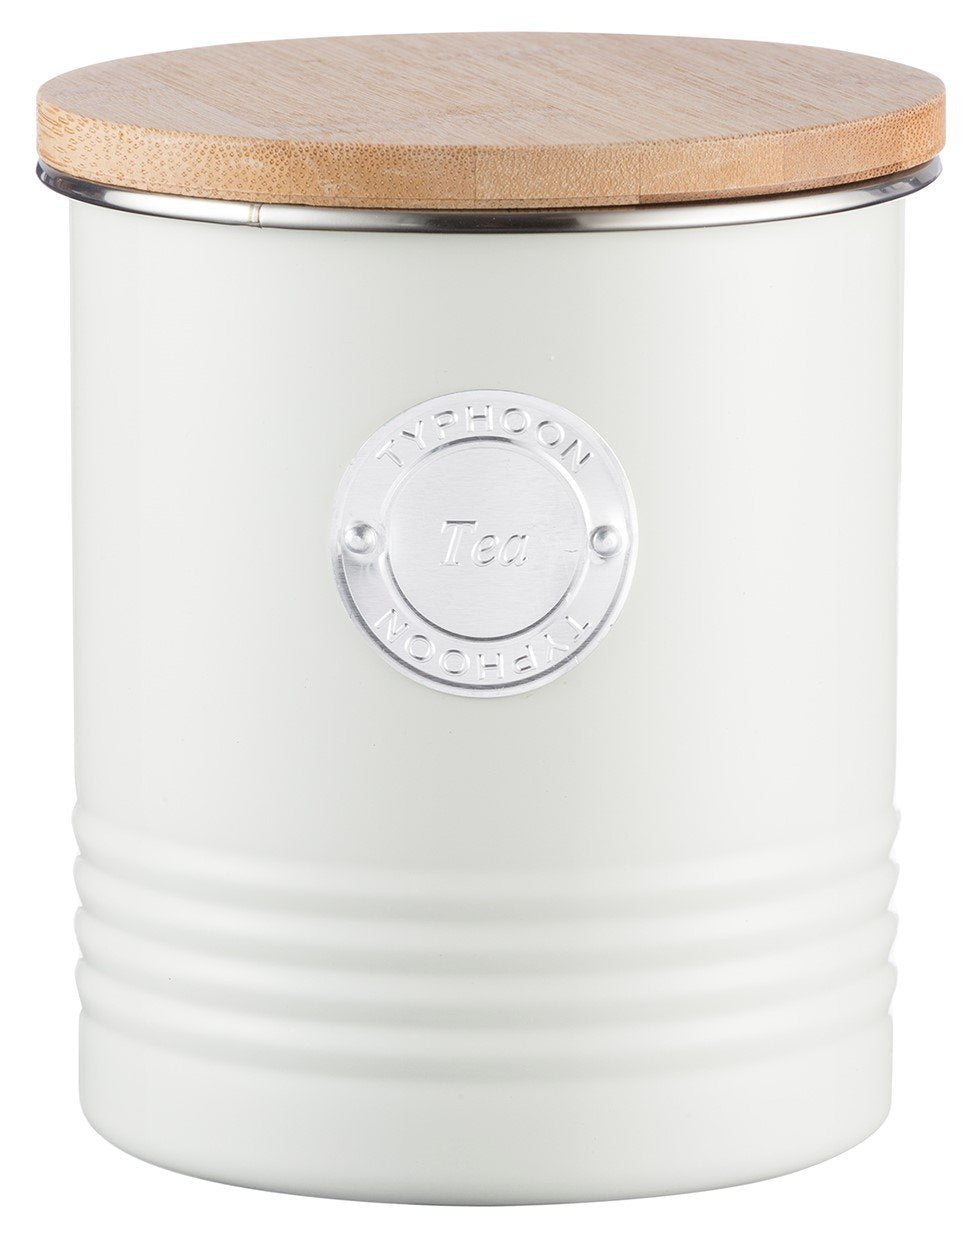  [AUSTRALIA] - Typhoon Living Cream Tea Canister, Airtight Bamboo Lid, Durable Carbon Steel Design with a Hard-wearing Matte Coating, 33-3/4-Fluid Ounces